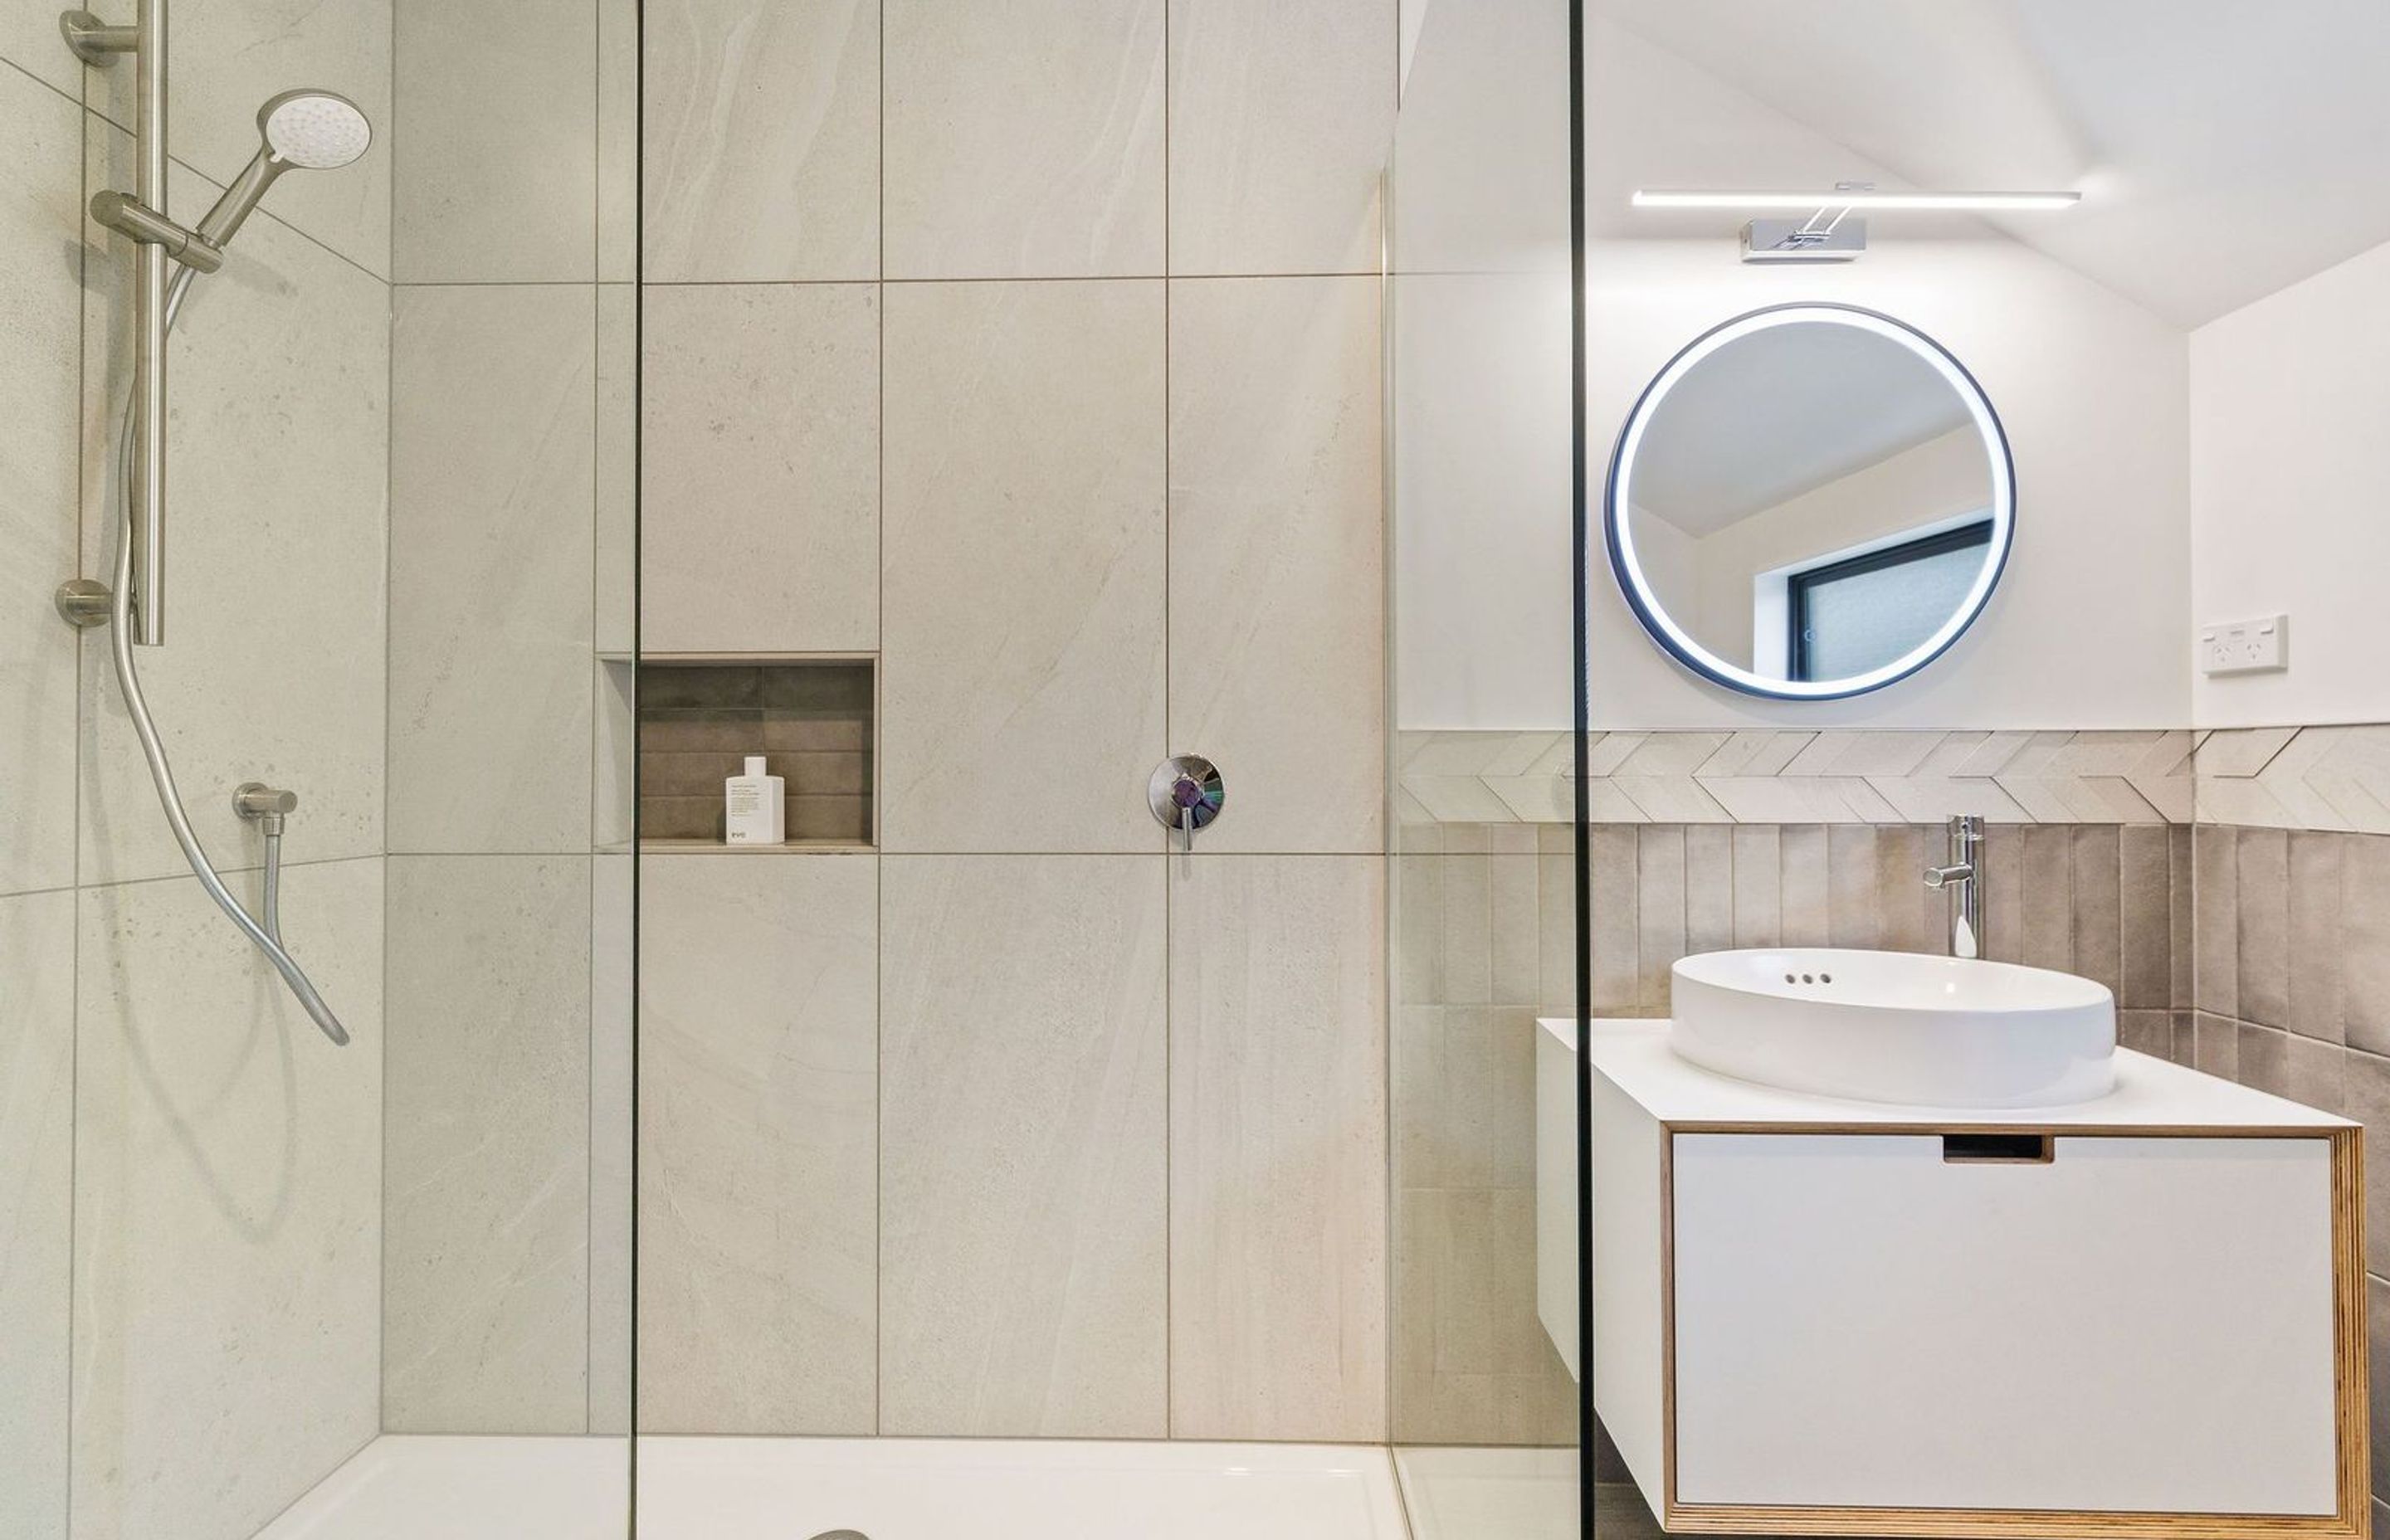 Unique Tiling Takes Centre Stage in This Wellington Bathroom